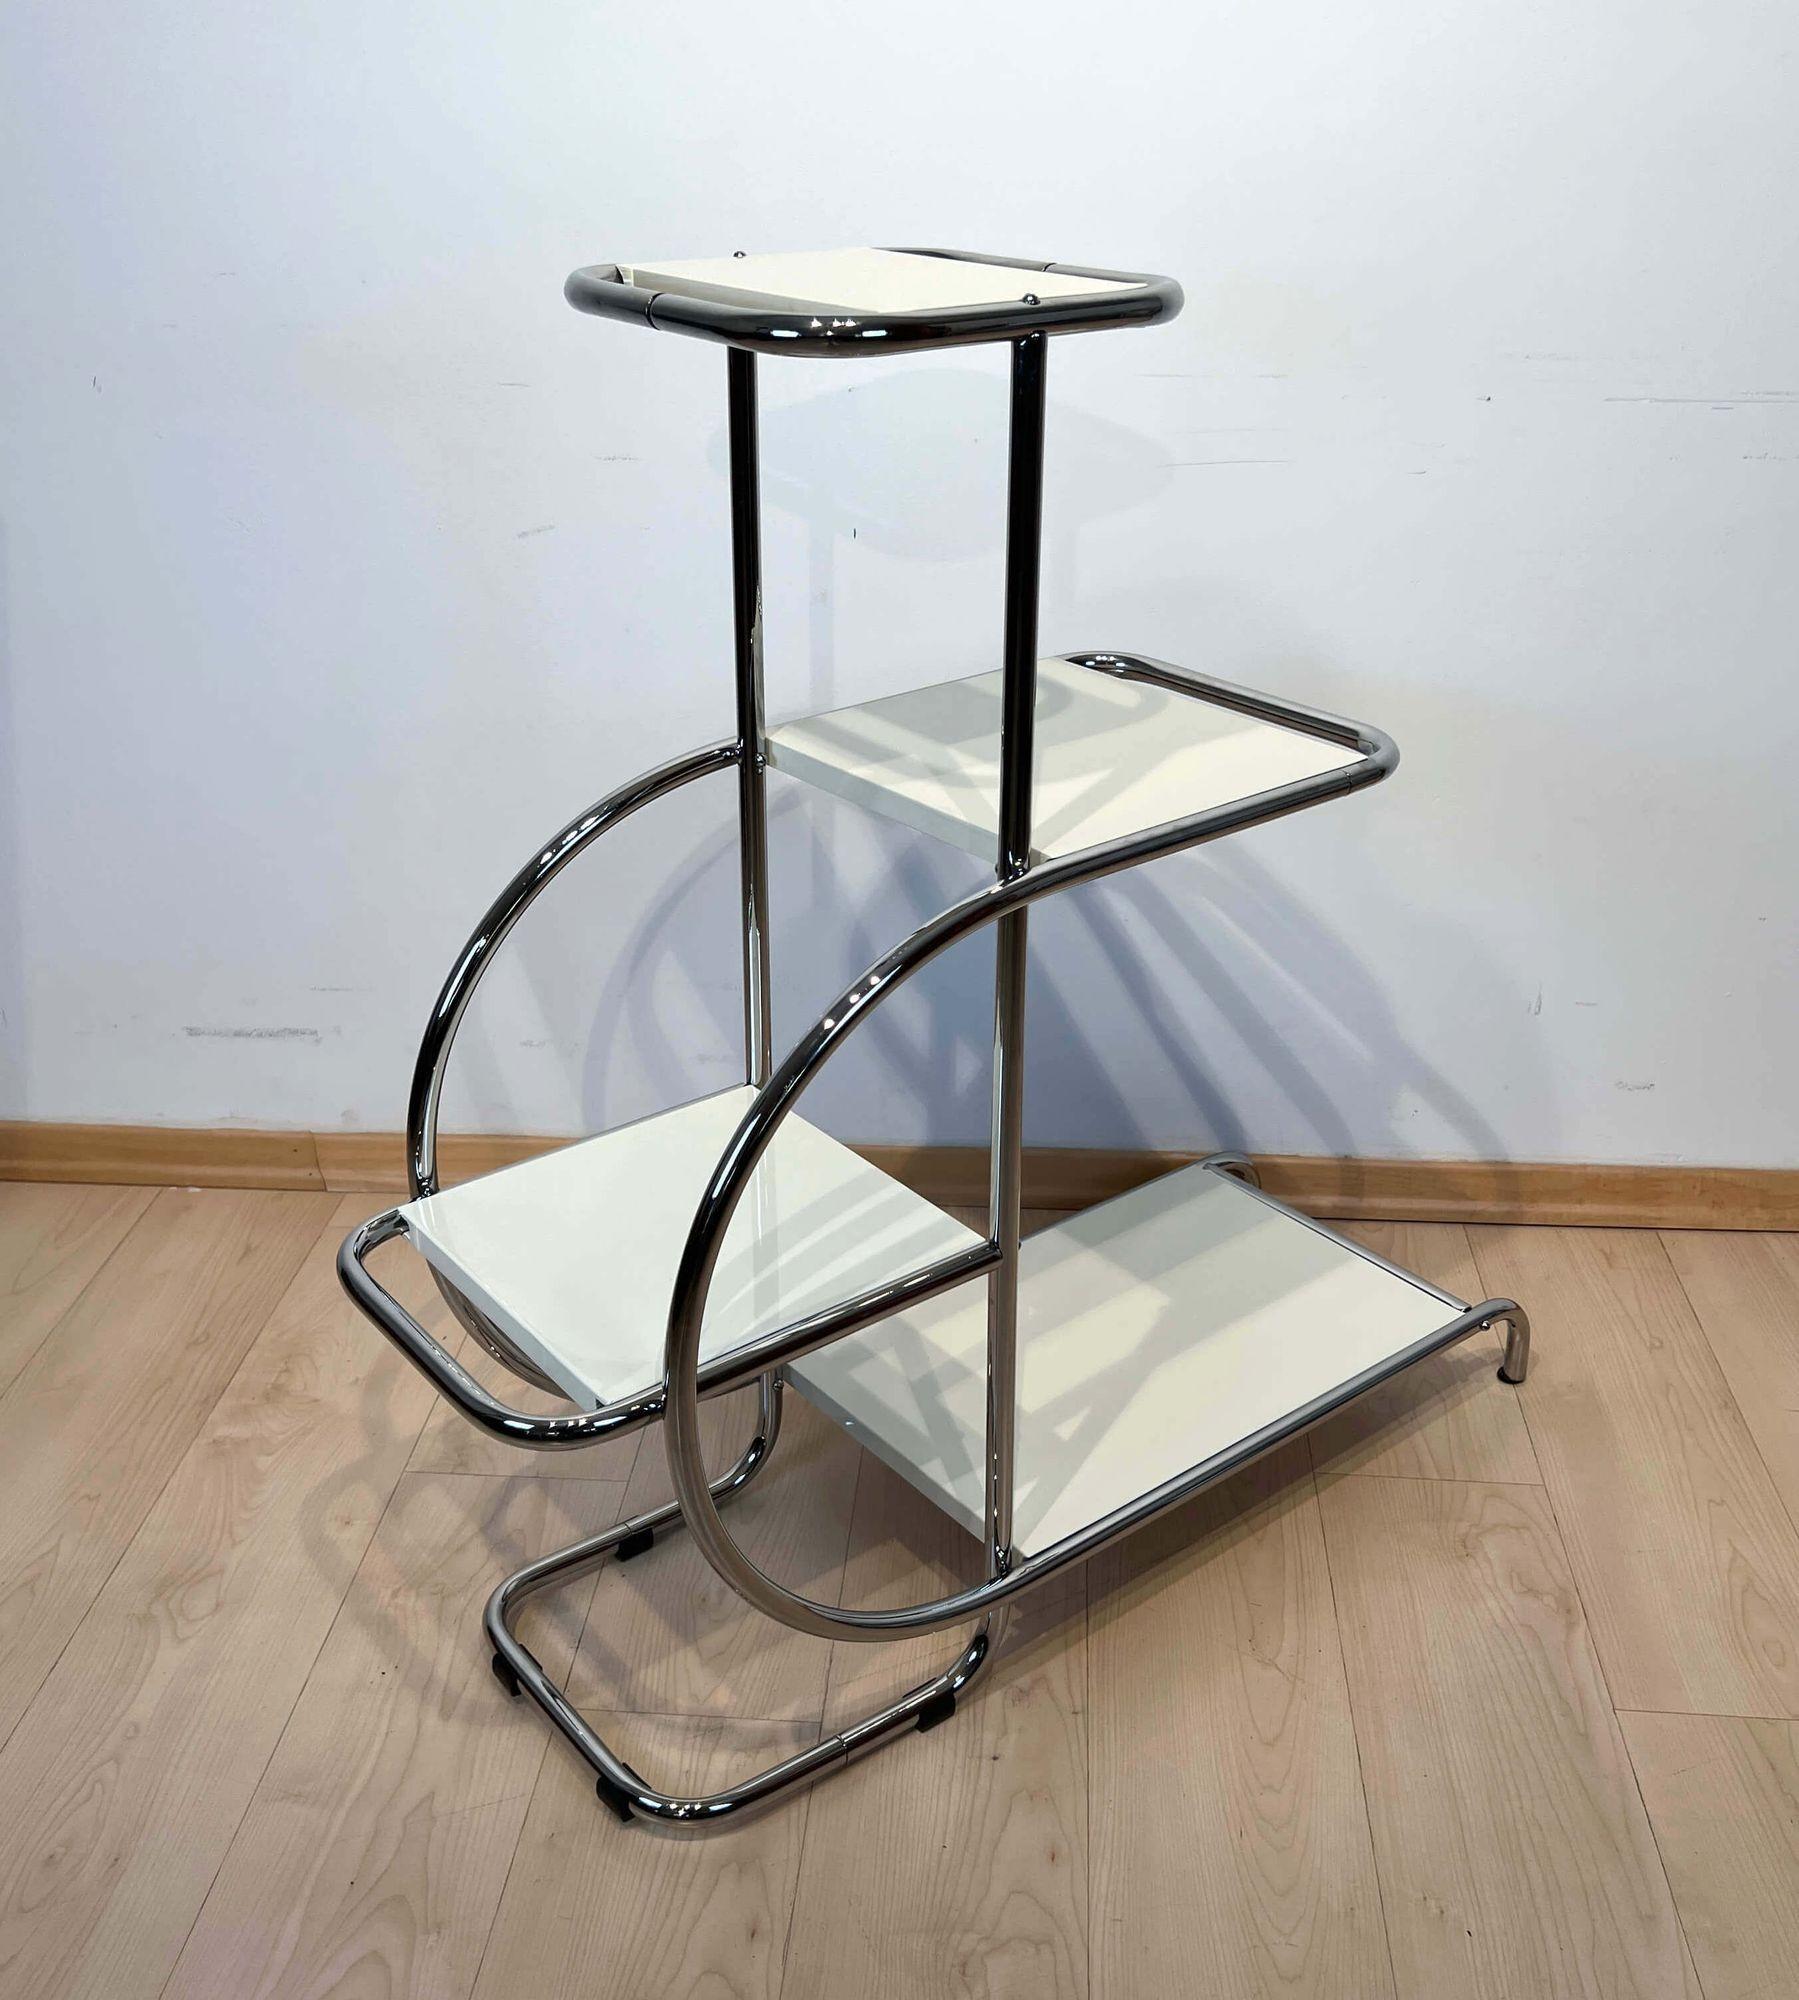 Galvanized Bauhaus Steeltube Etagere, Creme-White Lacquer, Nickel Plate, Germany, 1930s For Sale